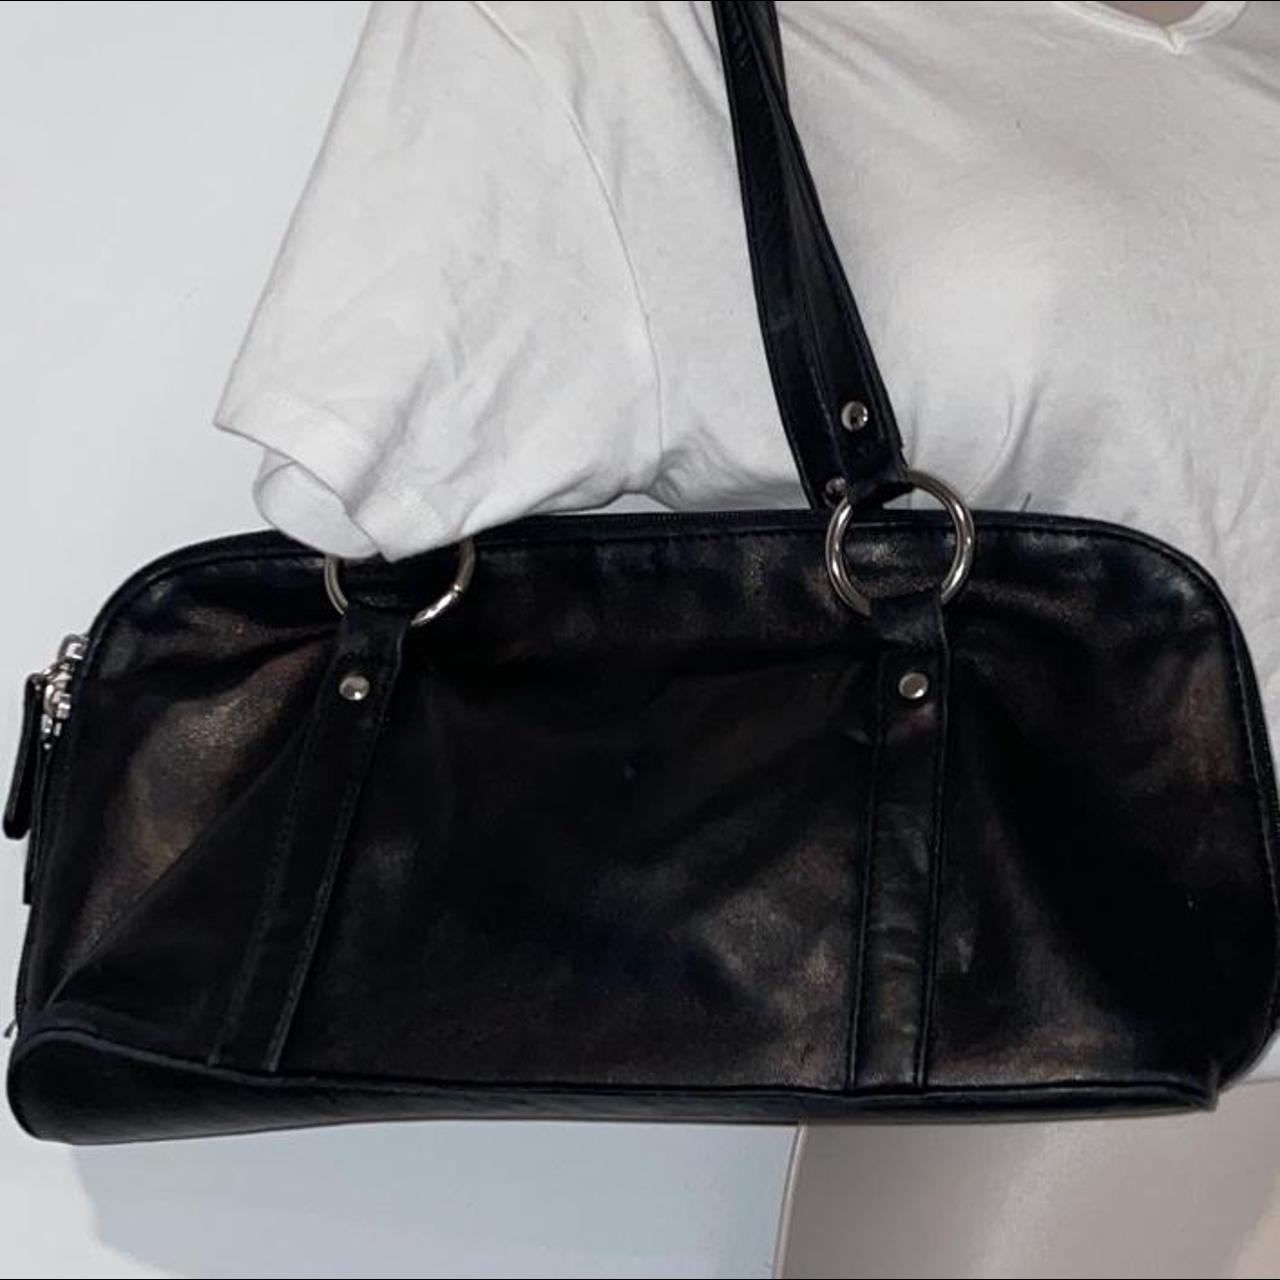 Product Image 4 - Amazing black purse with a